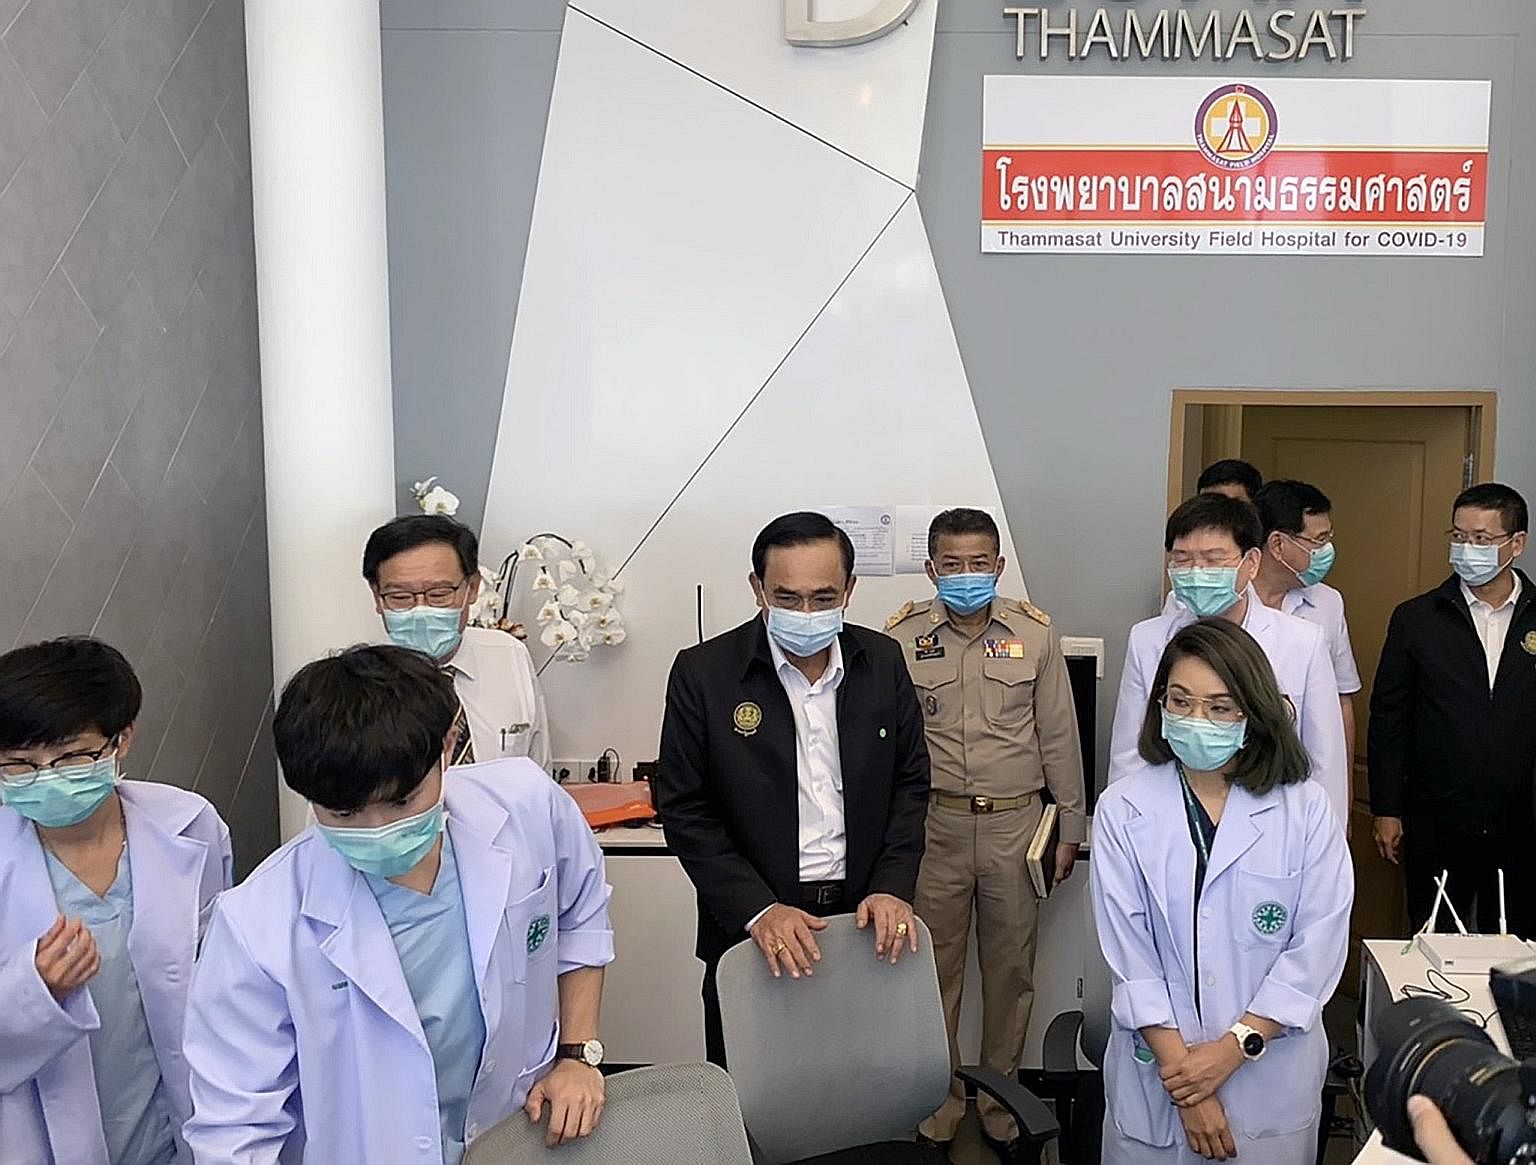 Thai Prime Minister Prayut Chan-o-cha (fourth from left) visiting the Thammasat University Field Hospital on Sunday. While Thailand is gaining control of the coronavirus situation, its economy could shrink 6.7 per cent this year.